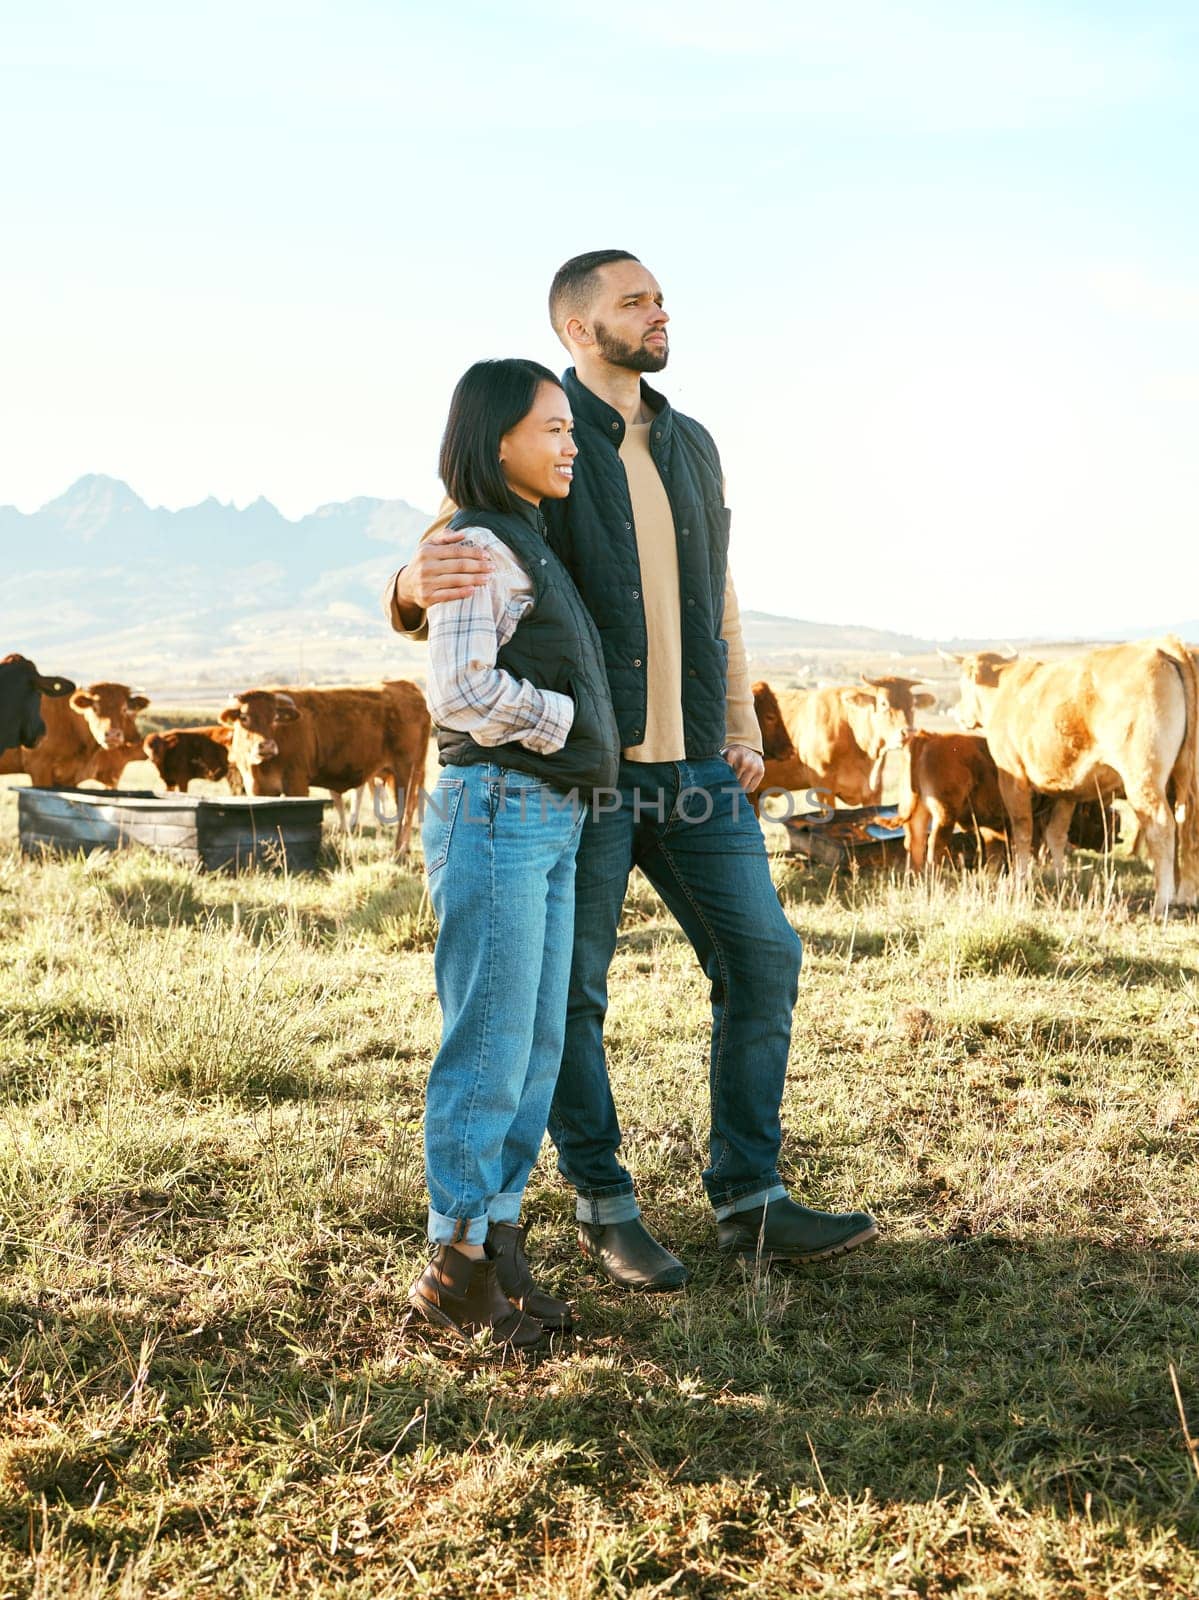 Couple, farm and hug in countryside travel, trip or holiday destination with live stock in natural agriculture. Man holding woman in relationship, traveling or enjoying getaway in nature with animals.